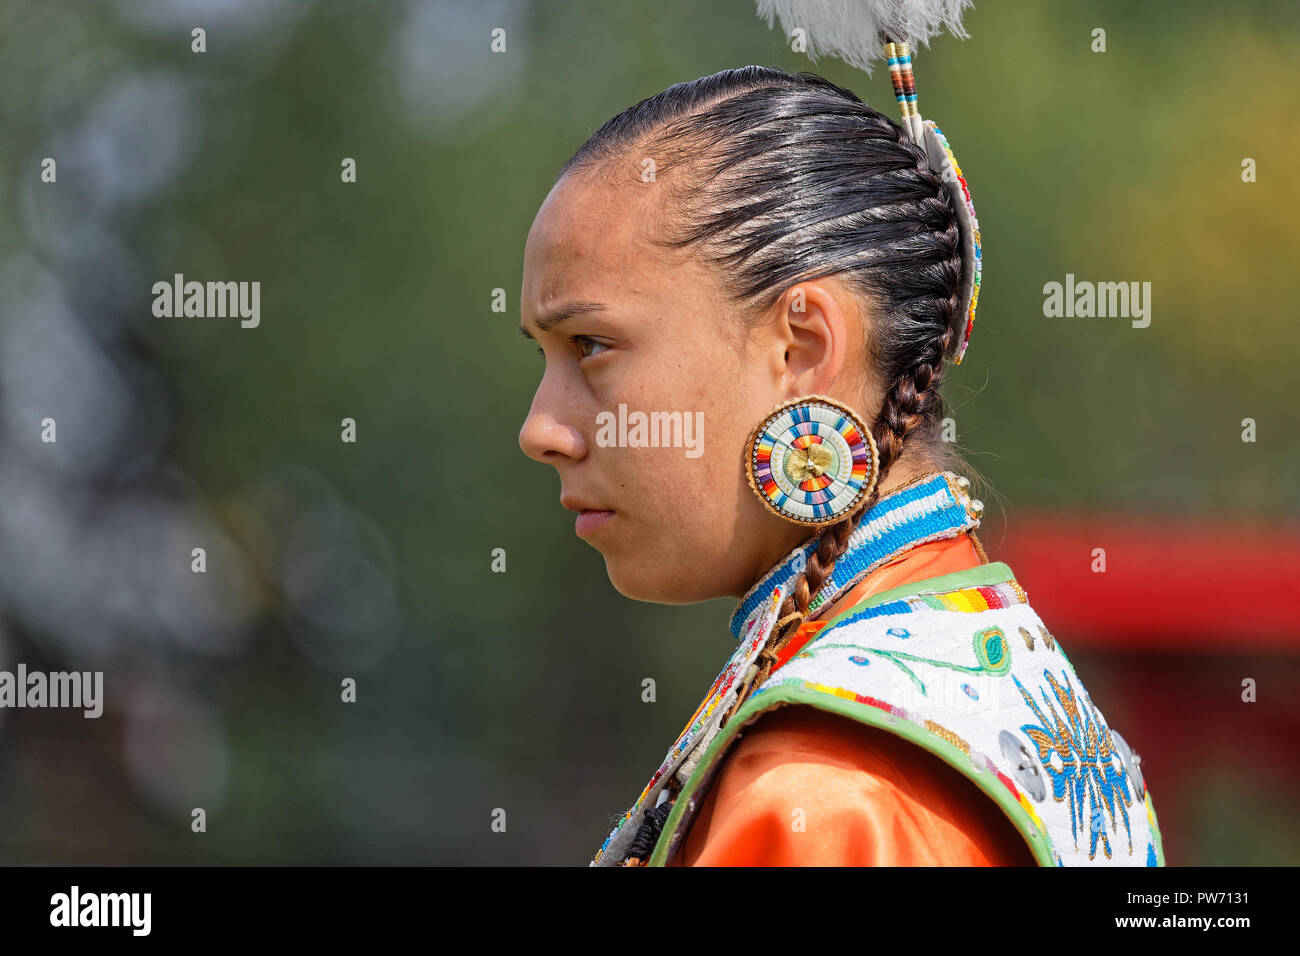 BISMARK, NORTH DAKOTA, September 9, 2018 : A dancer of the 49th annual United Tribes Pow Wow, one large outdoor event that gathers more than 900 dance Stock Photo